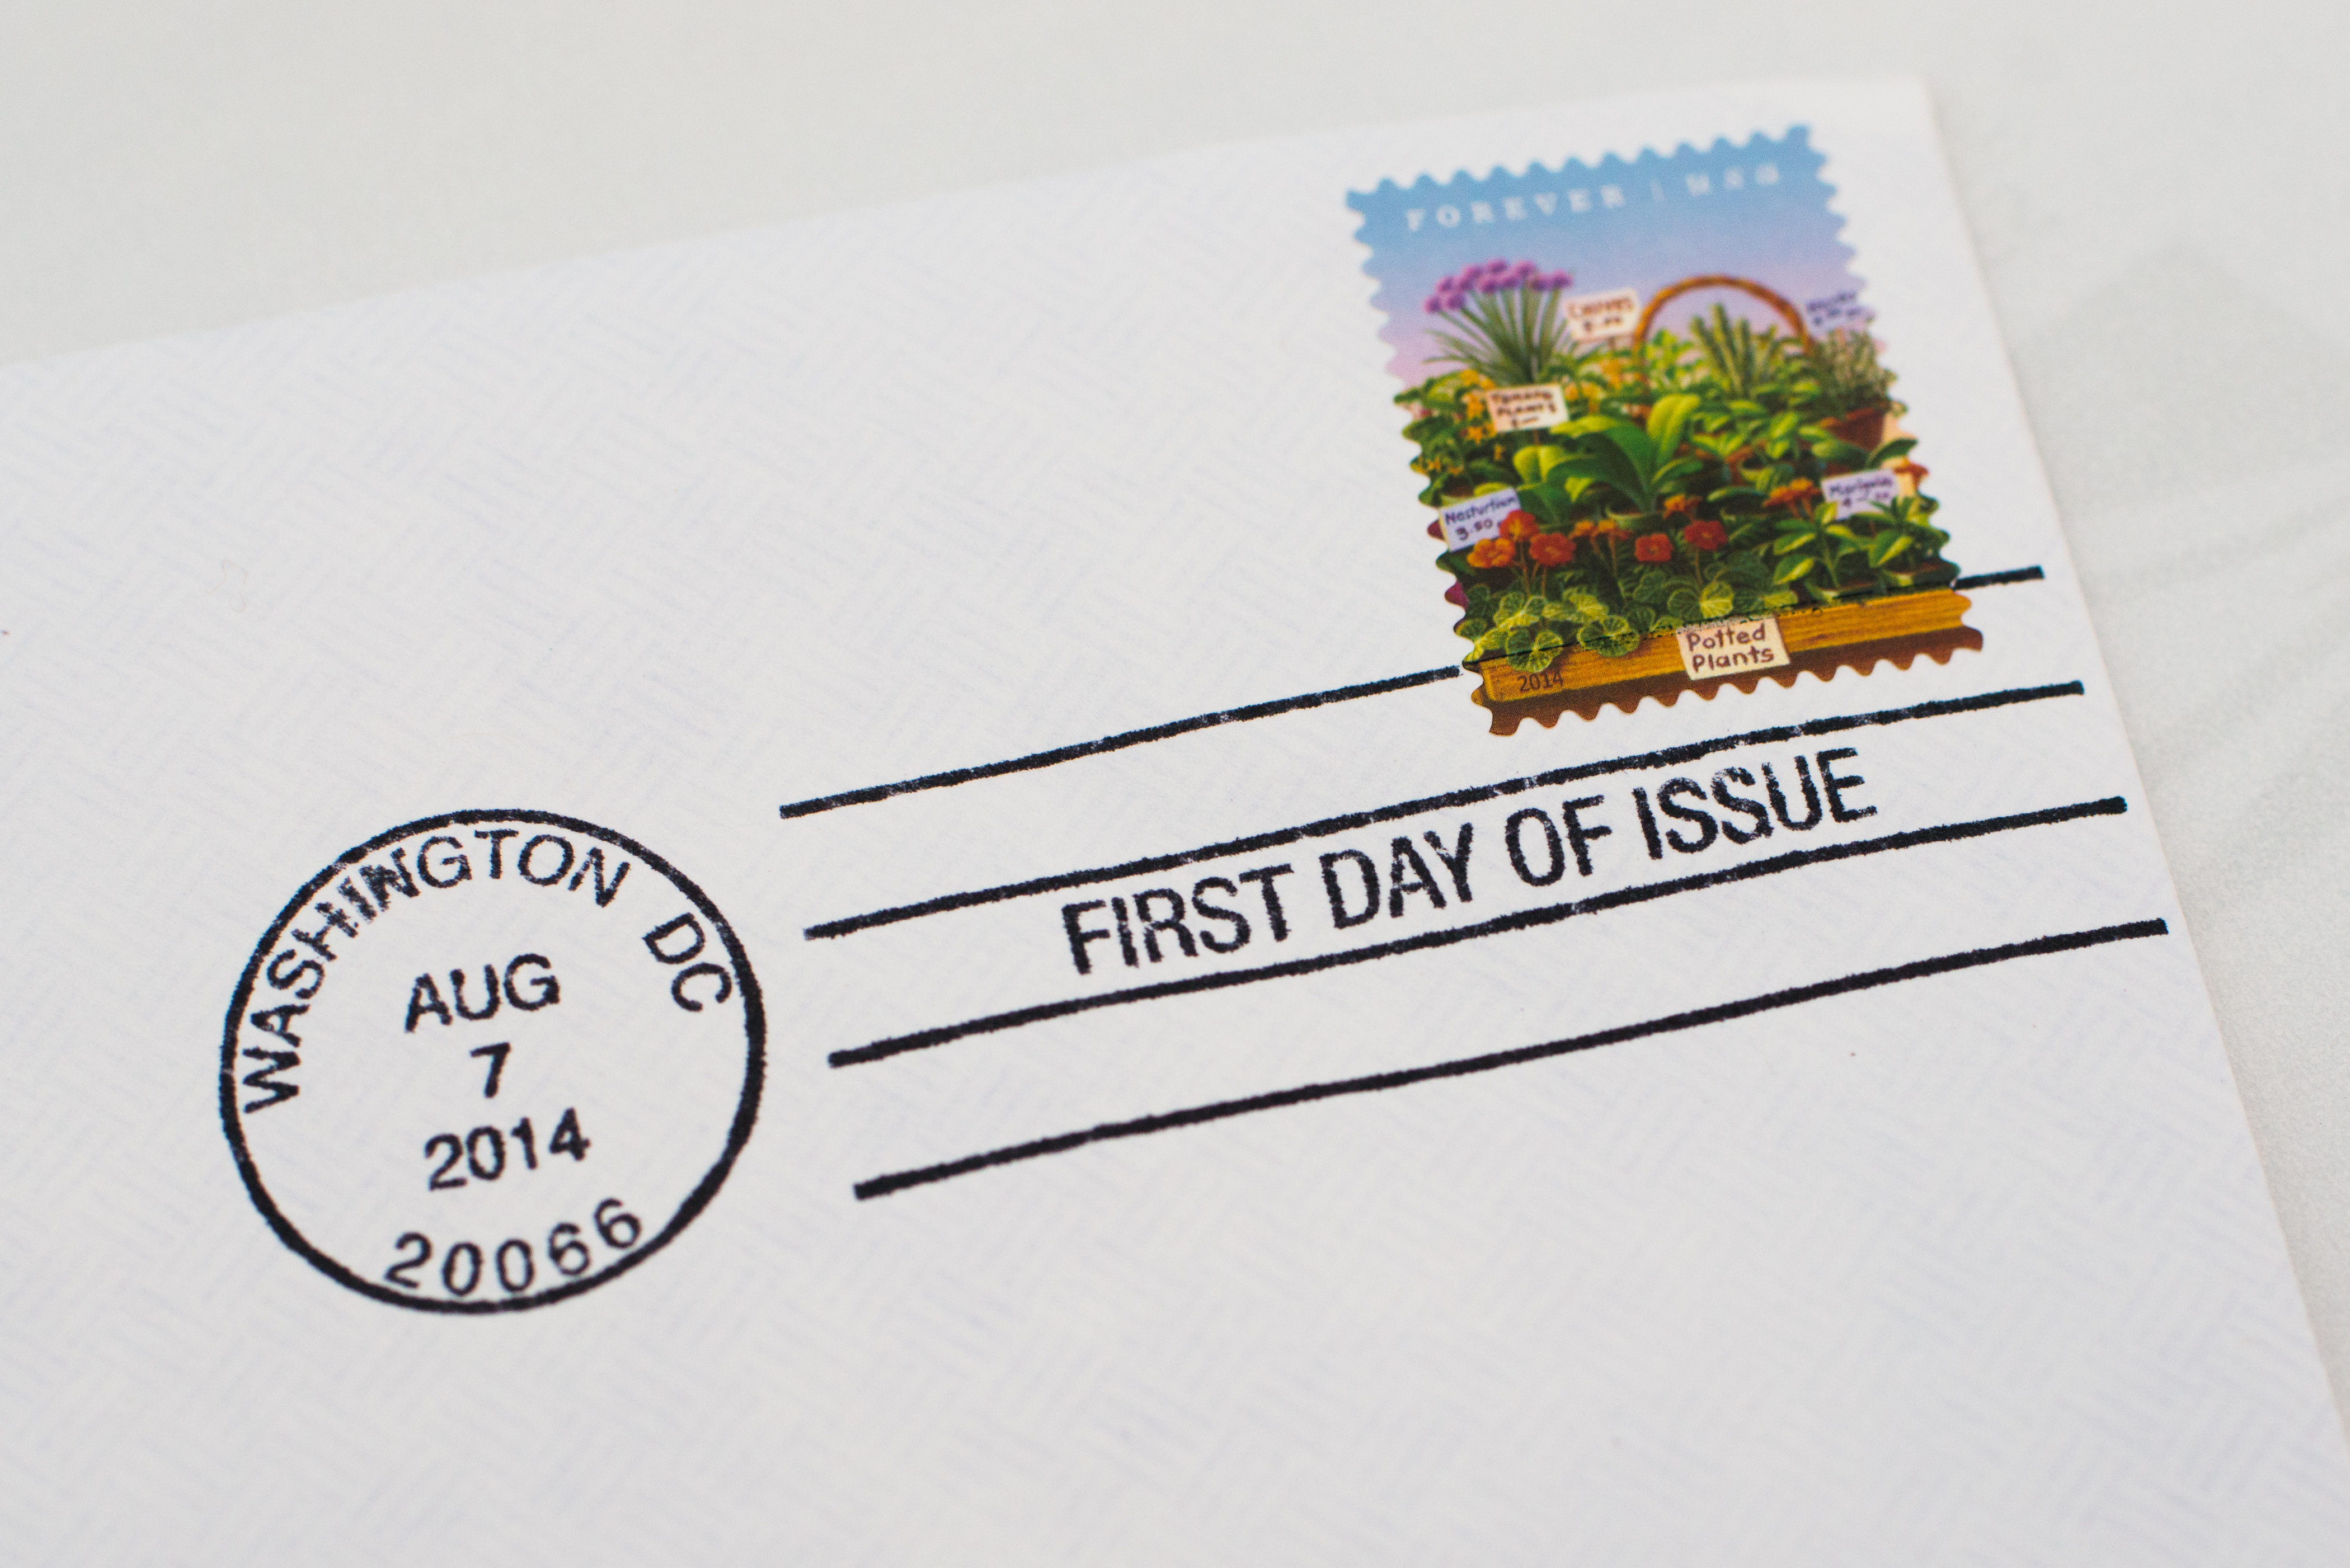 The U.S. Postal Service celebrated America's farmers markets with new Forever stamps in 2014. (Sarah L. Voisin—The Washington Post/Getty Images)